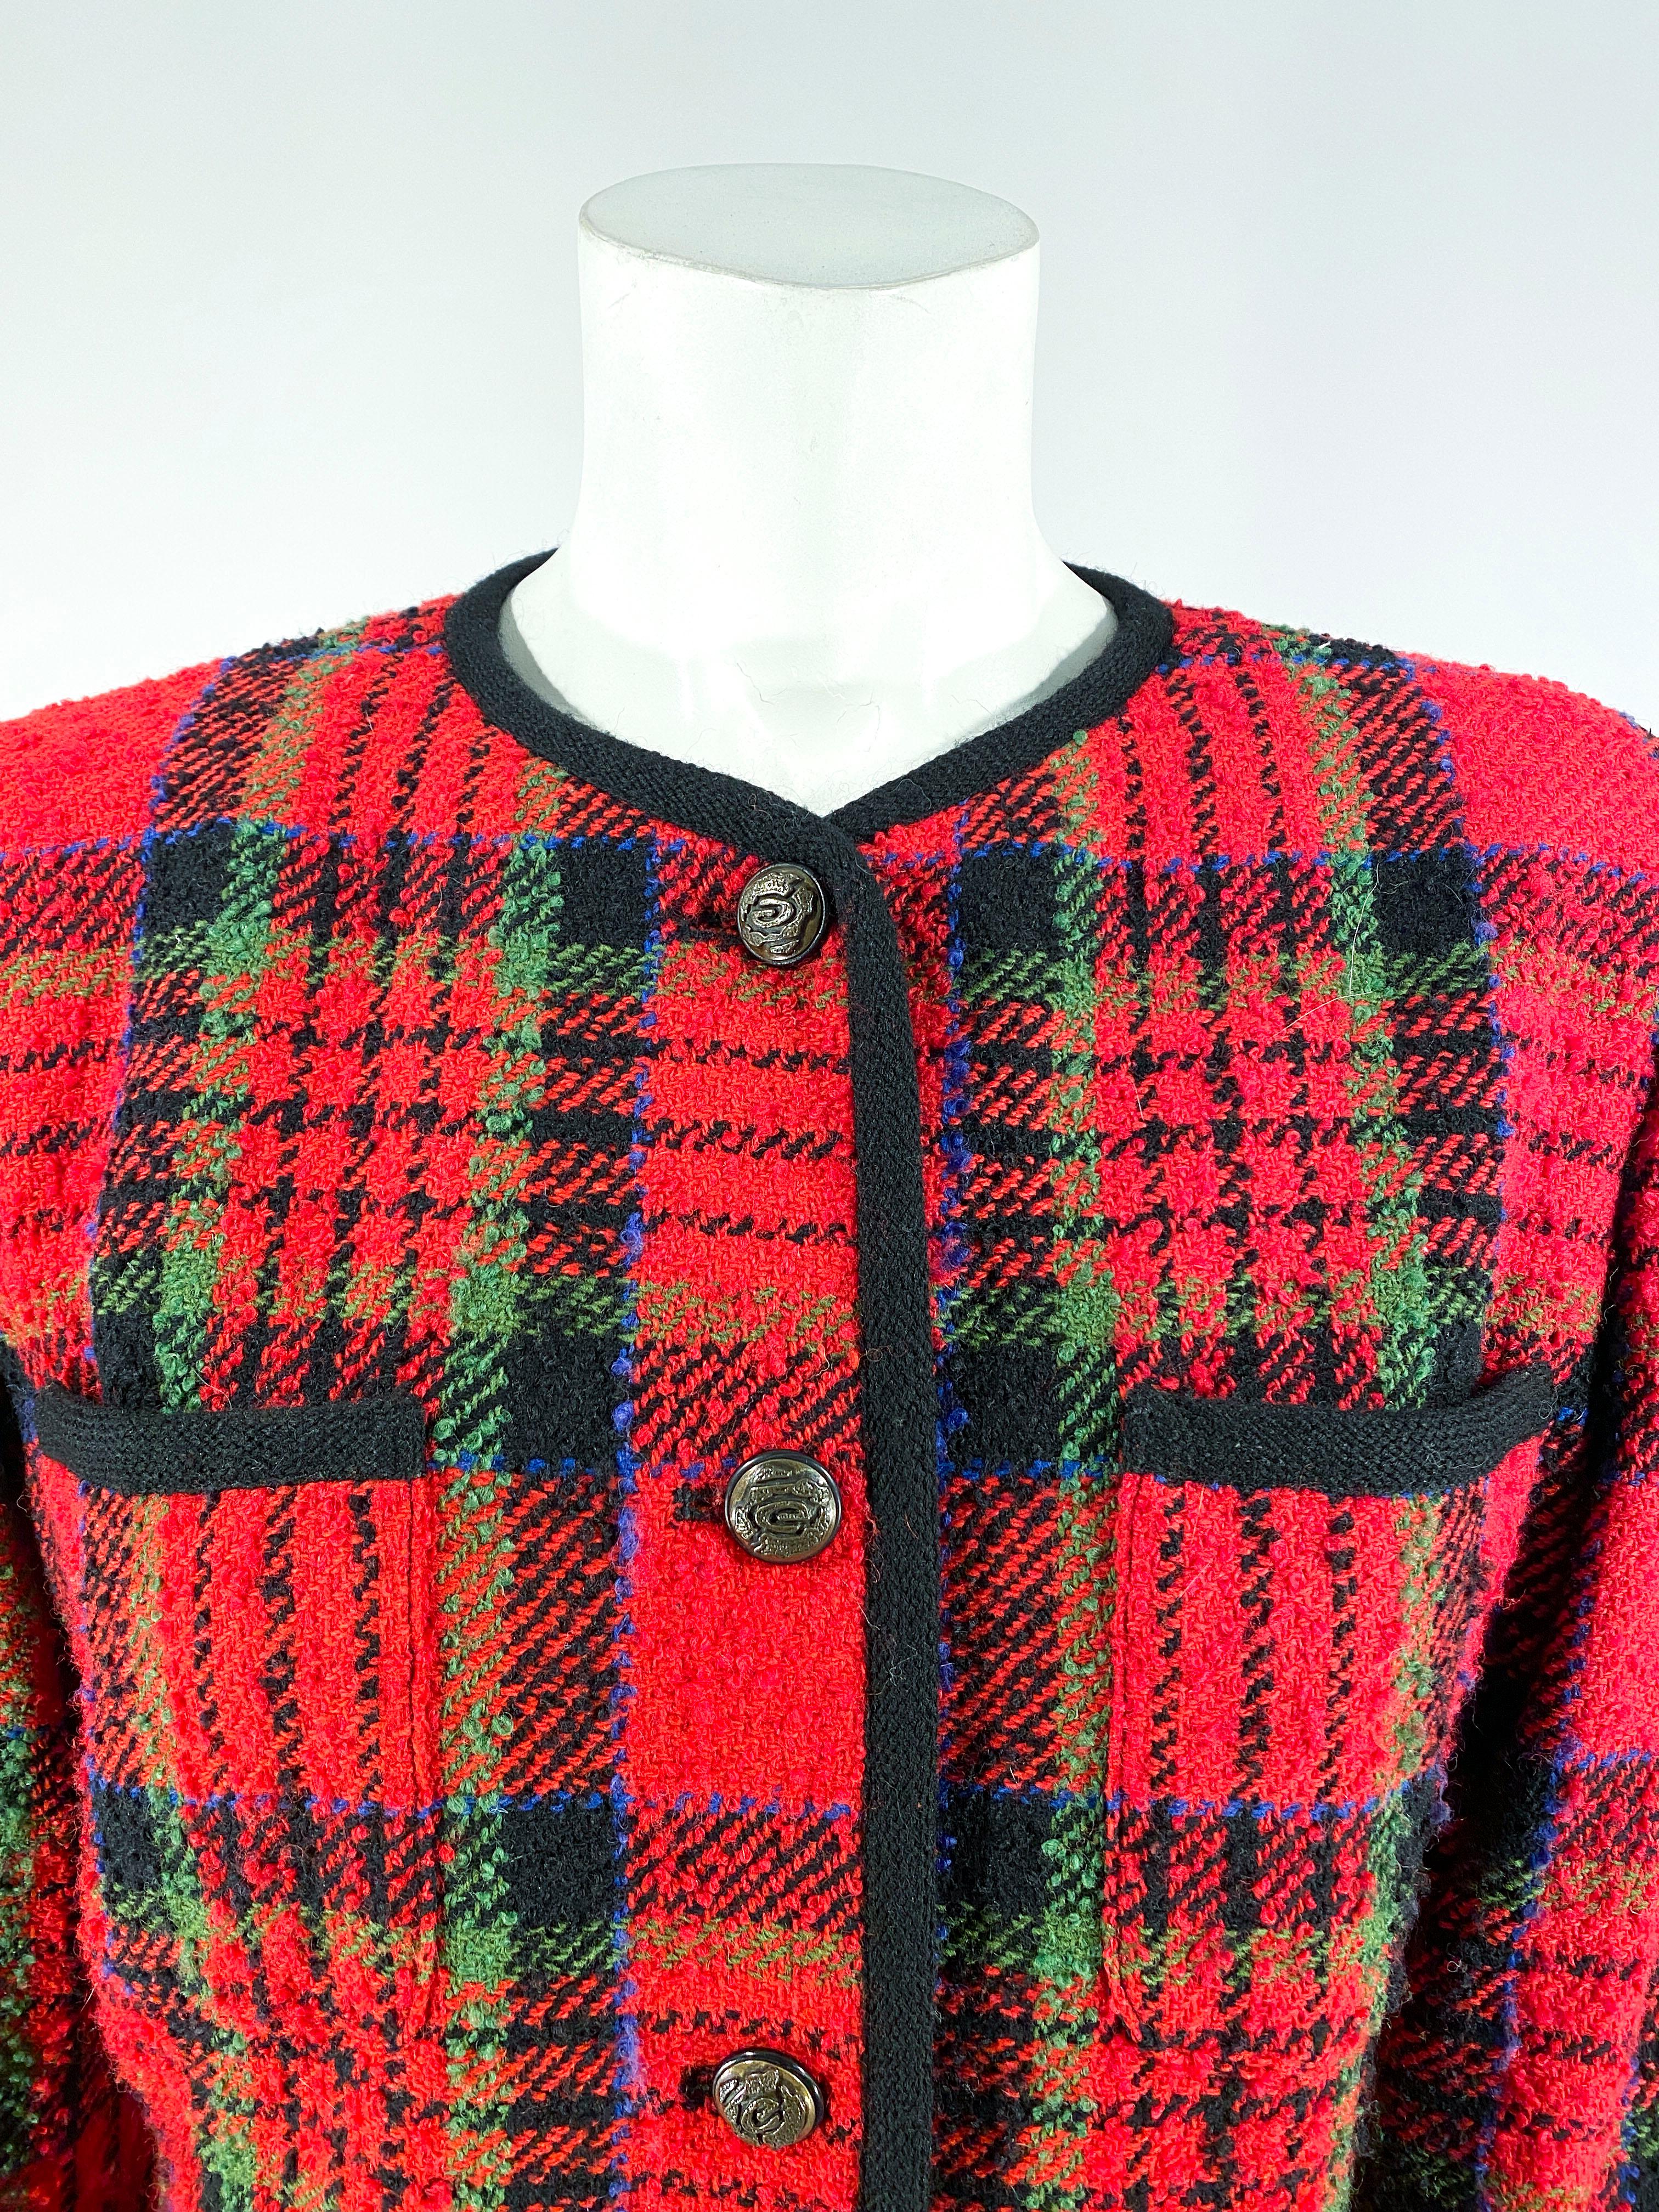 1980s Ungaro wool blend plaid blazer featuring green blue and black stripes on a red background. The face has four pockets all edges with thick black piping that matches the neckline and hem of the sleeves. The shoulders are padded for a top-heavy